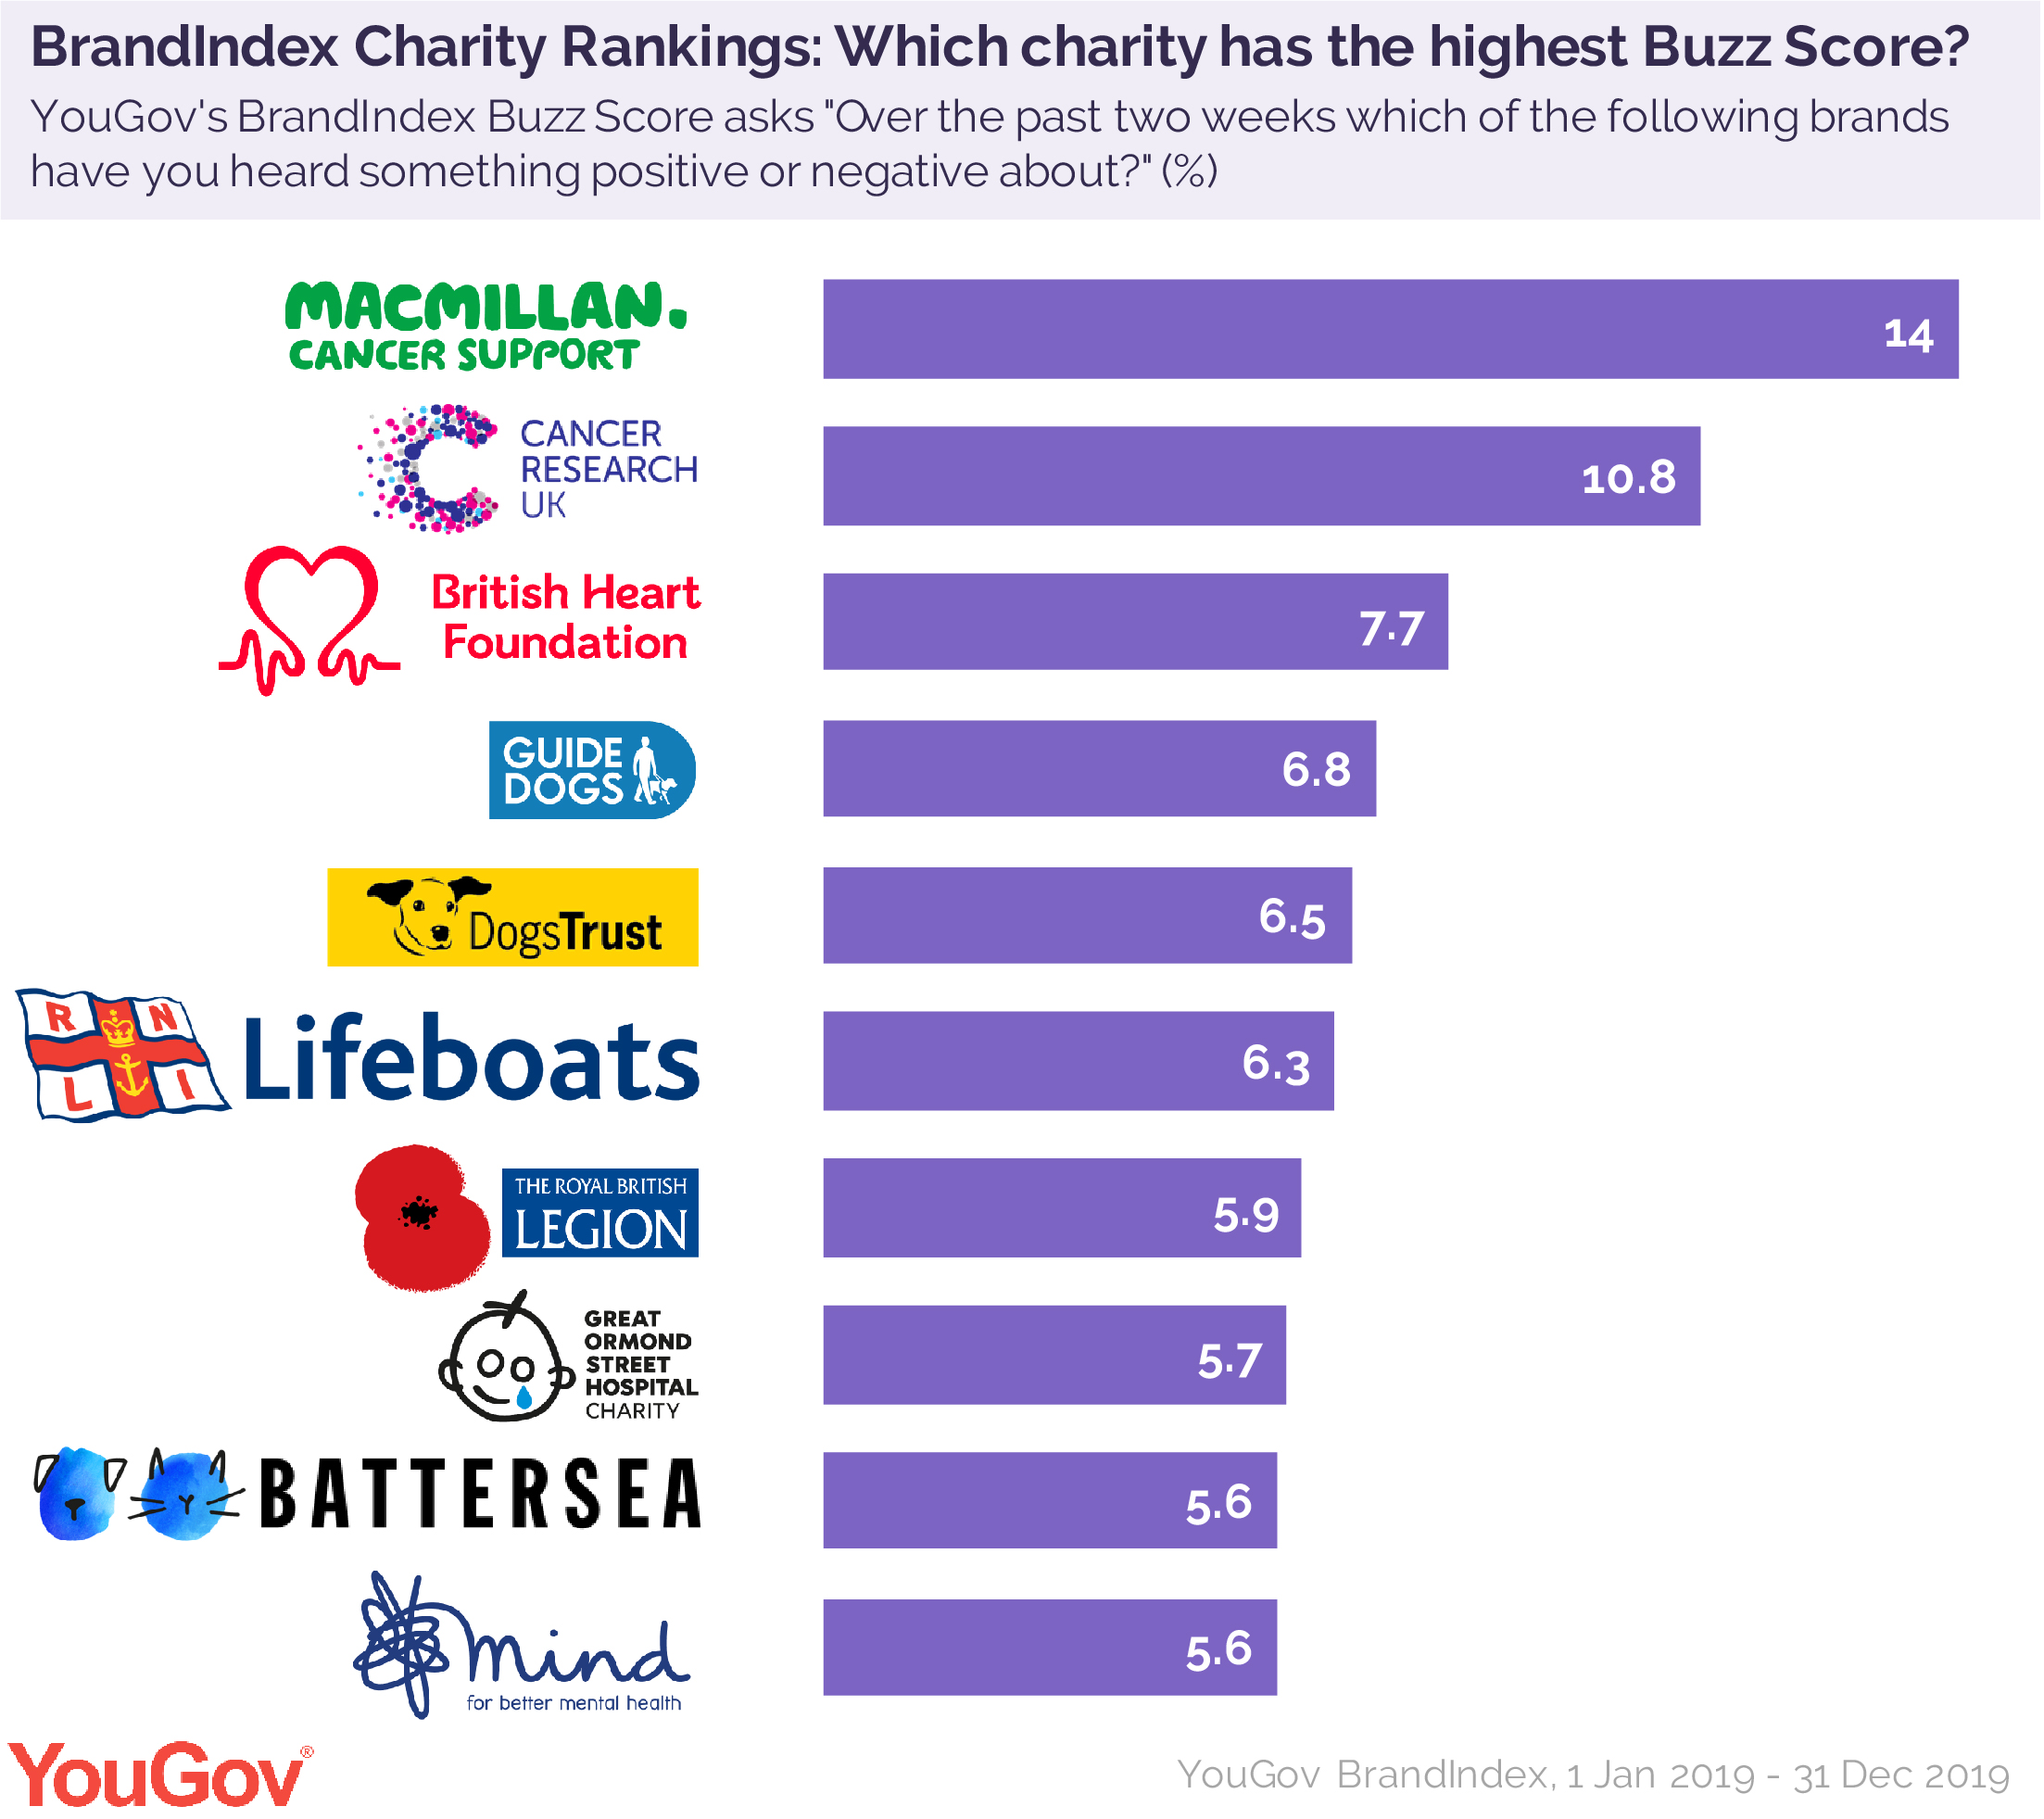 Macmillan tops YouGov’s CharityIndex Buzz Rankings for seventh year